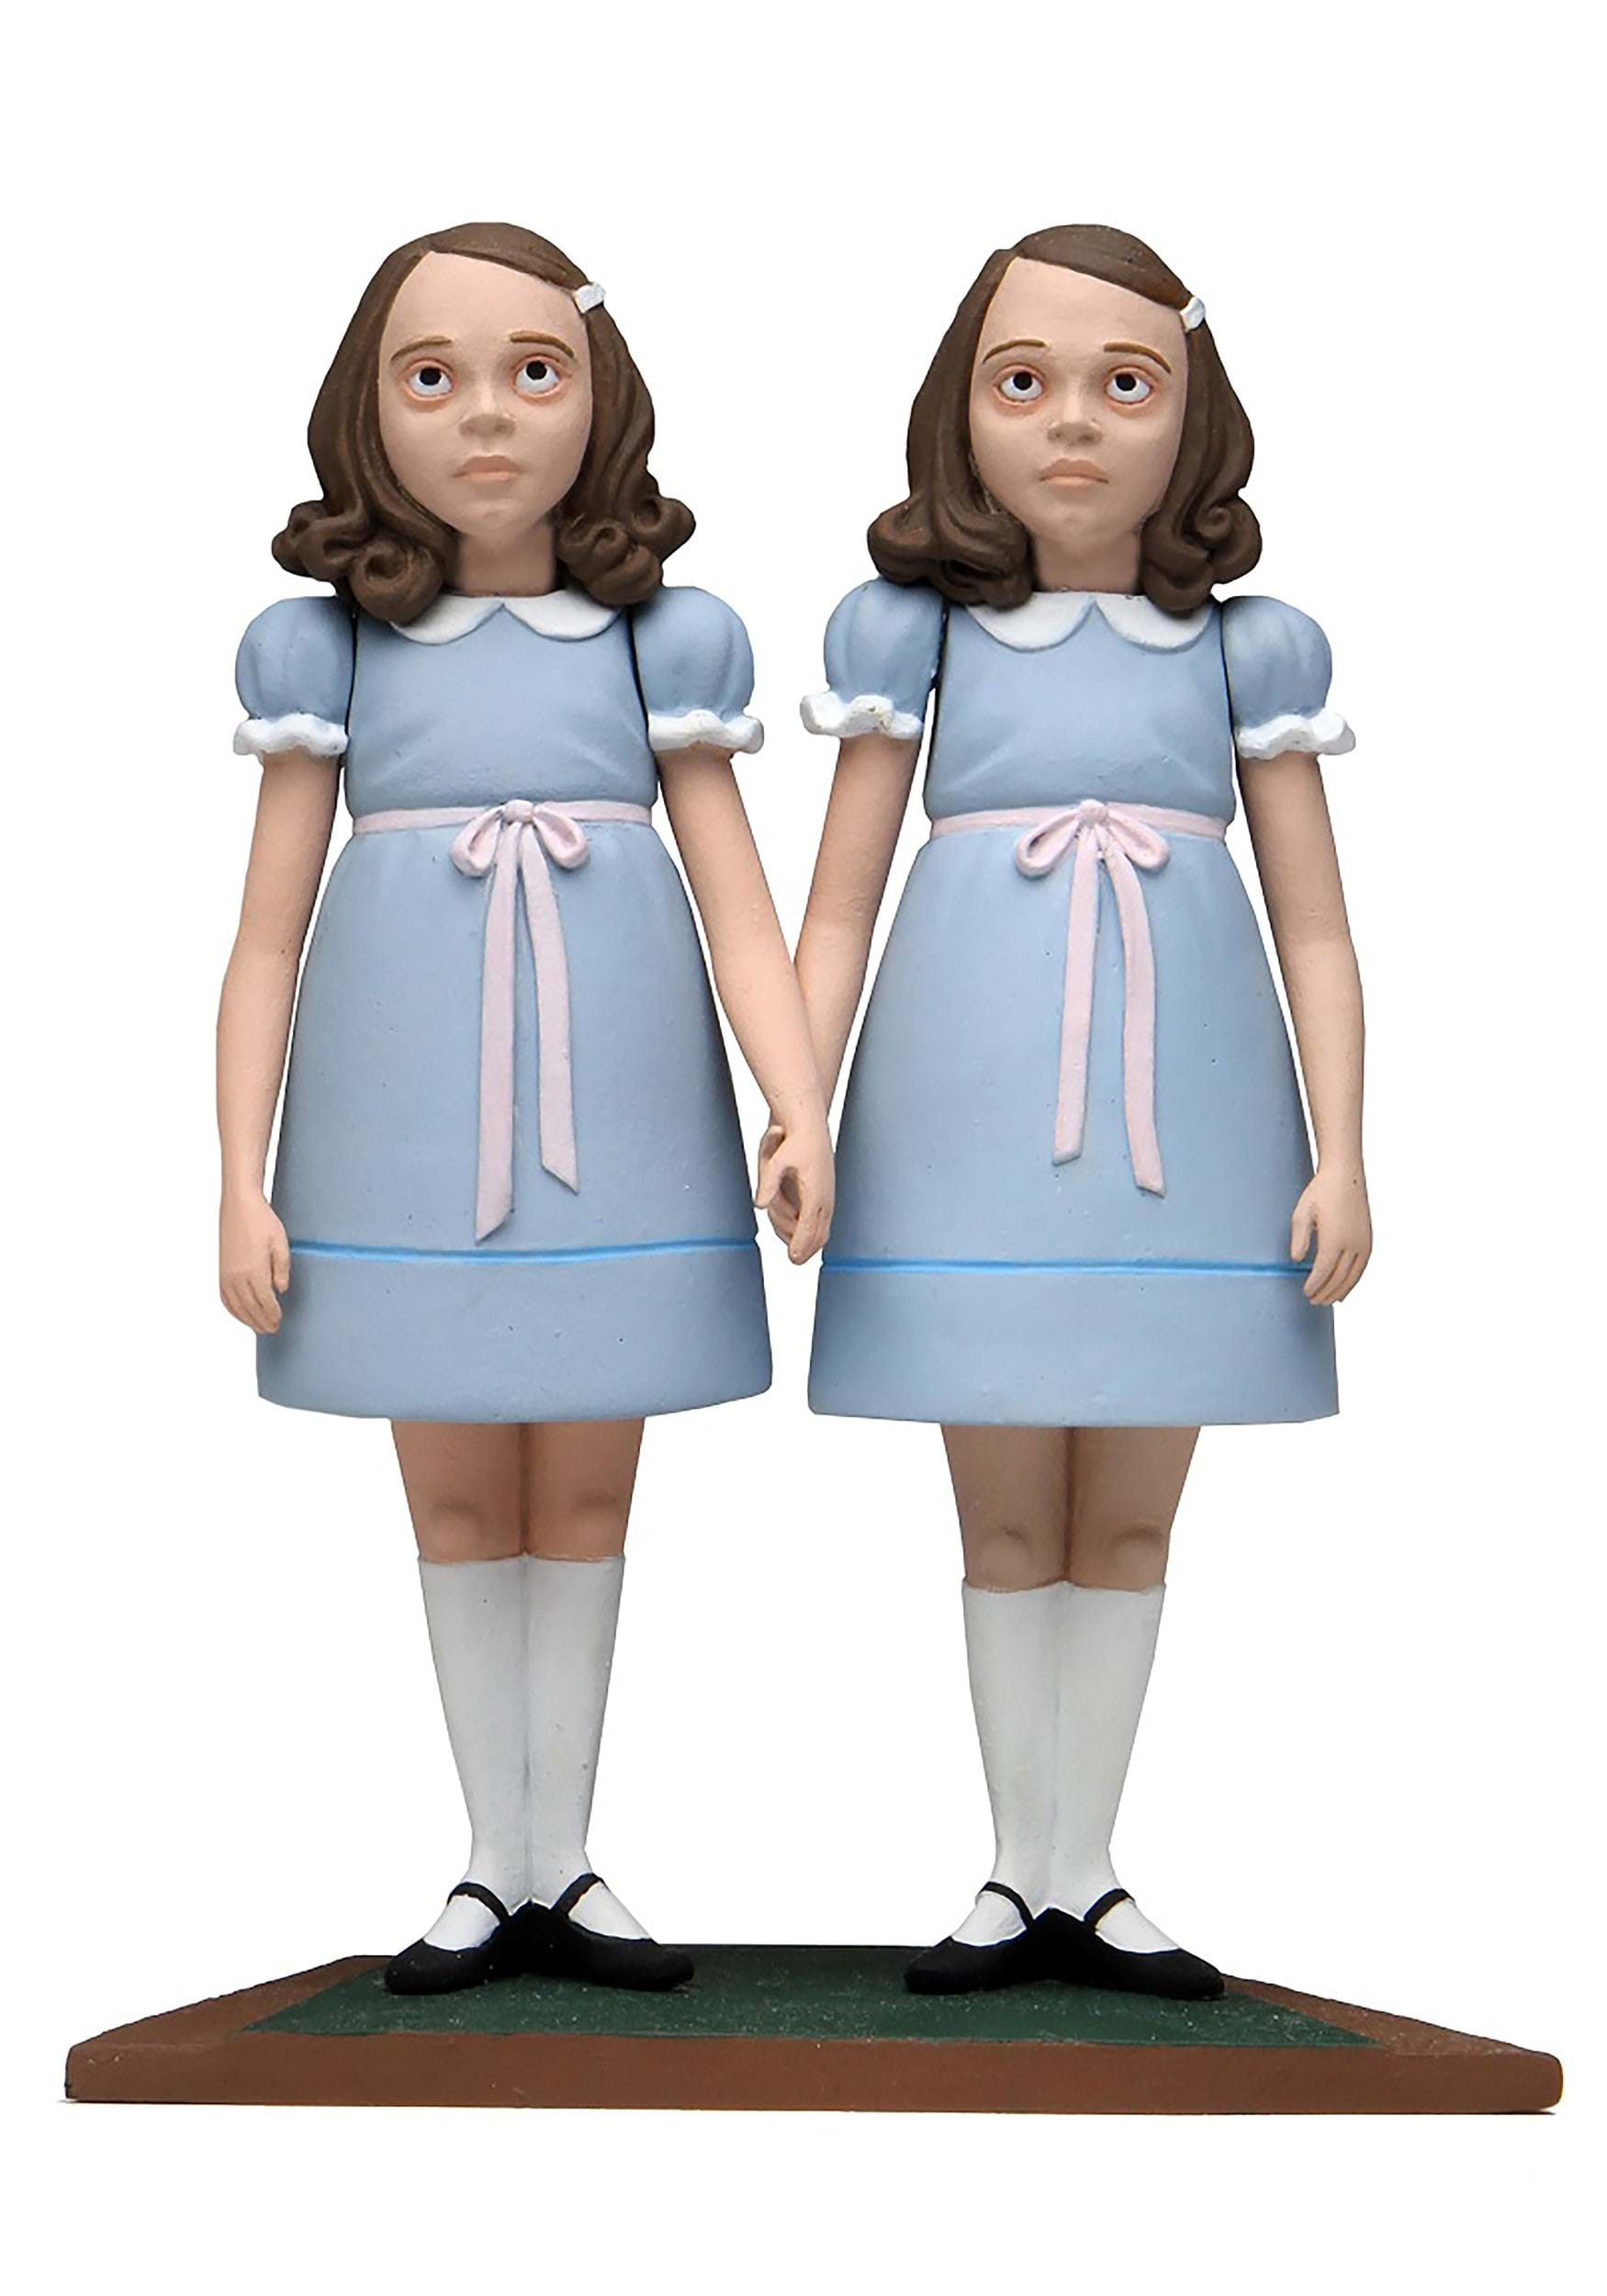 Grady Twins form The Shining Toony Terrors 6" Scale Action Figures